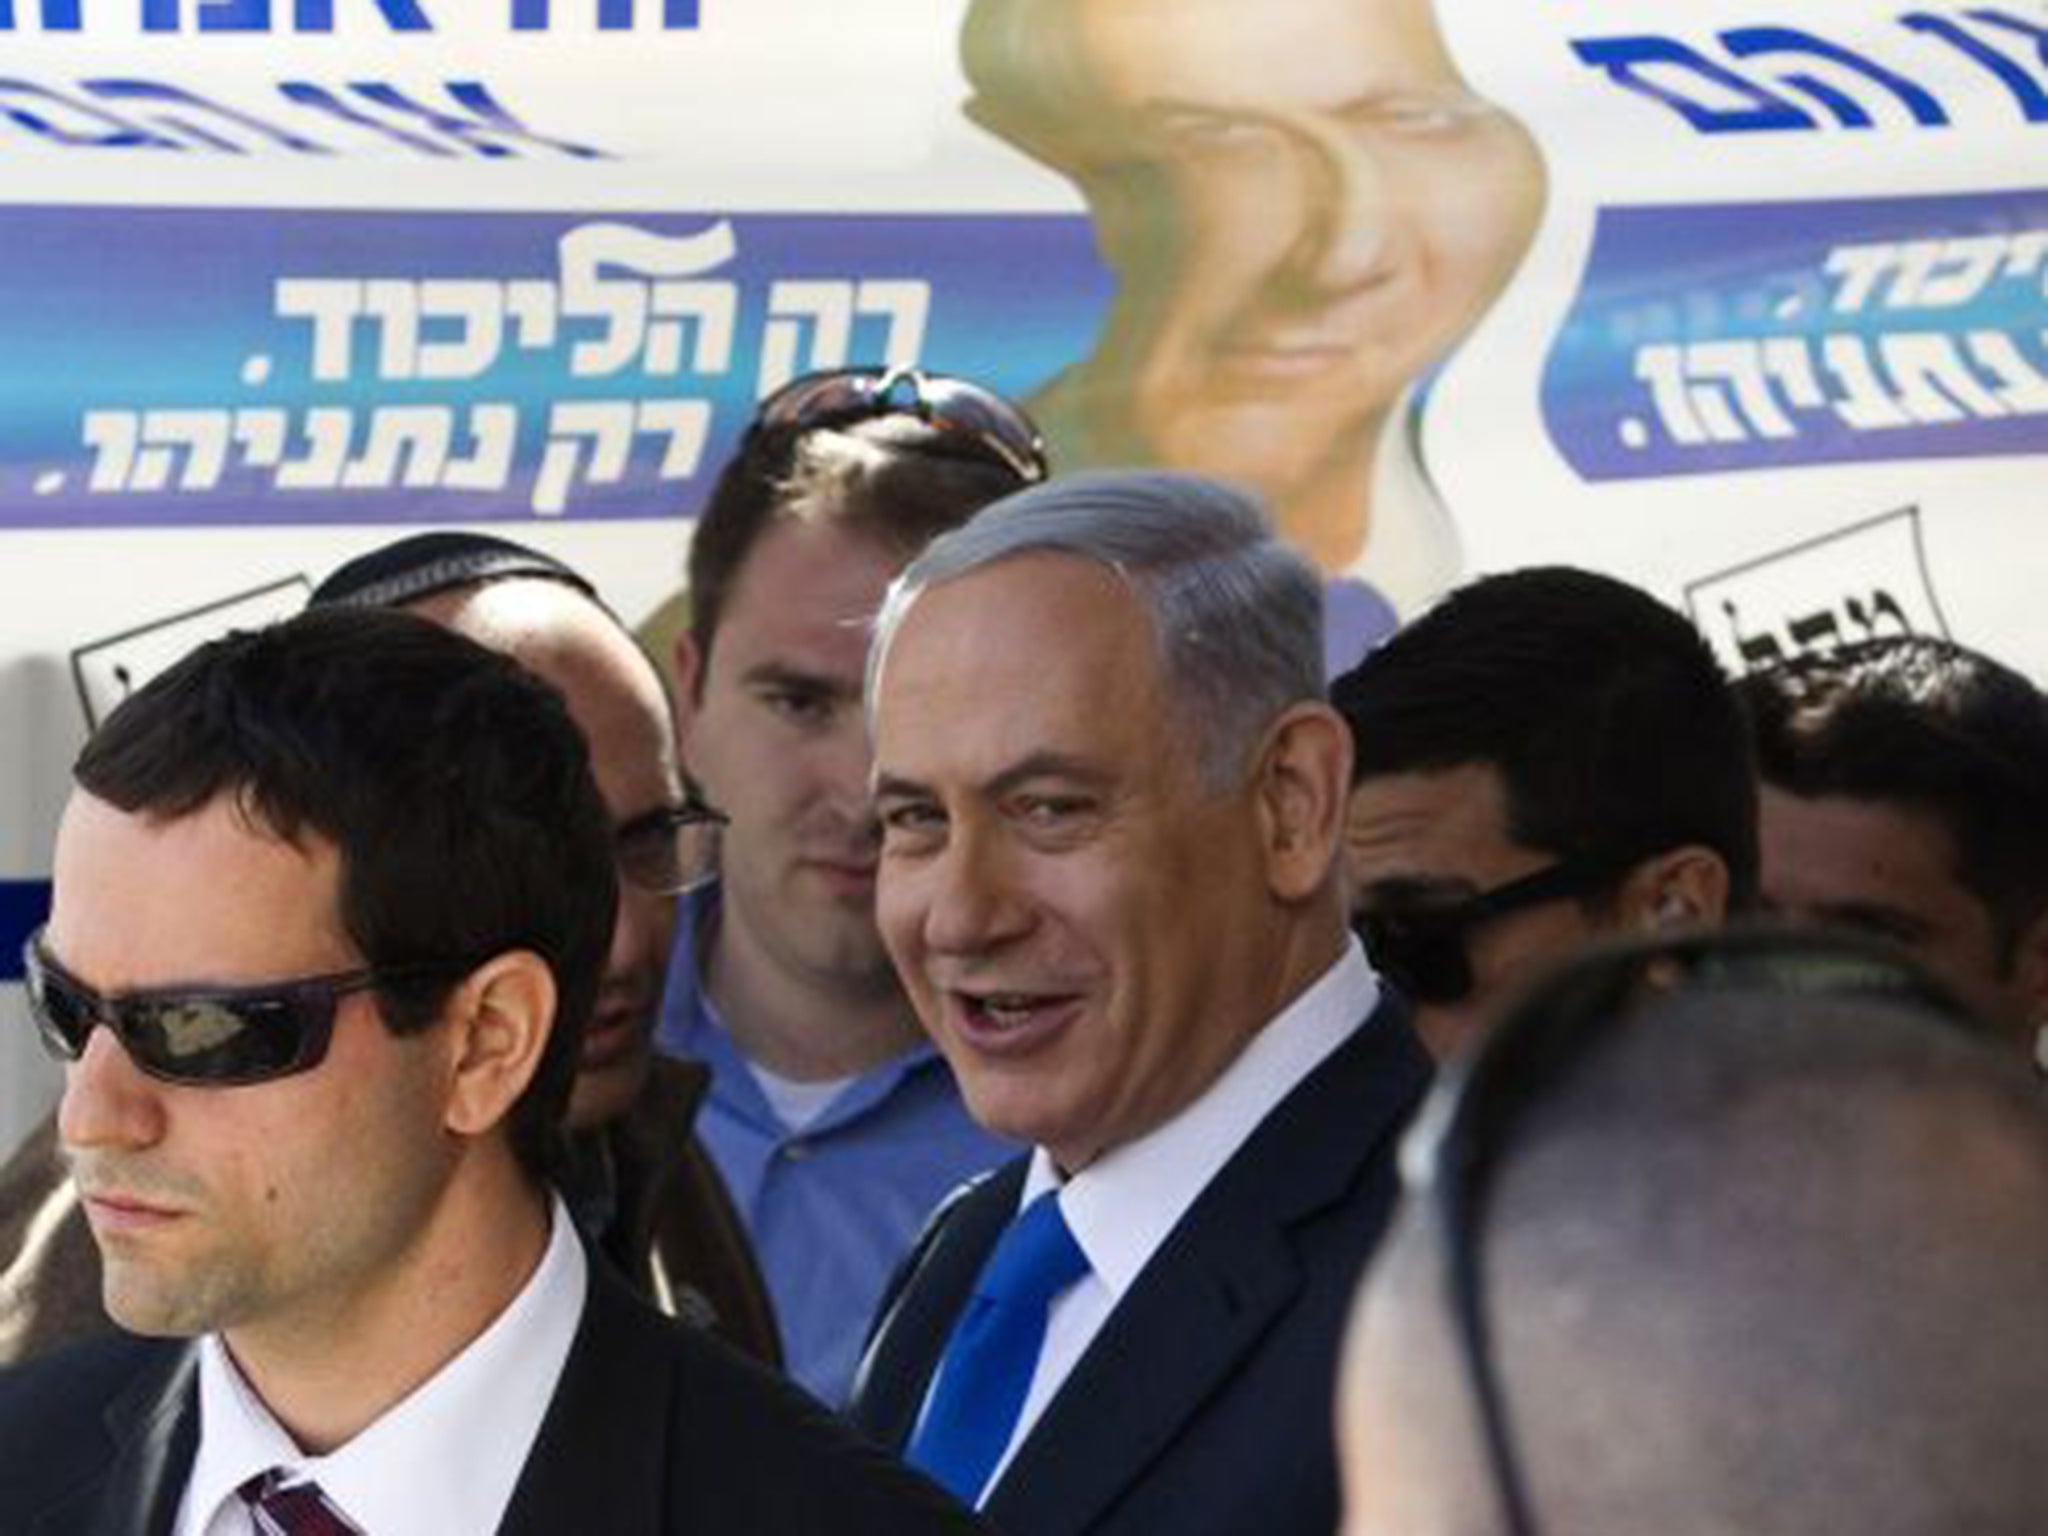 Israeli Prime Minister Benjamin Netanyahu has ruled out the formation of a Palestinian state if he is re-elected